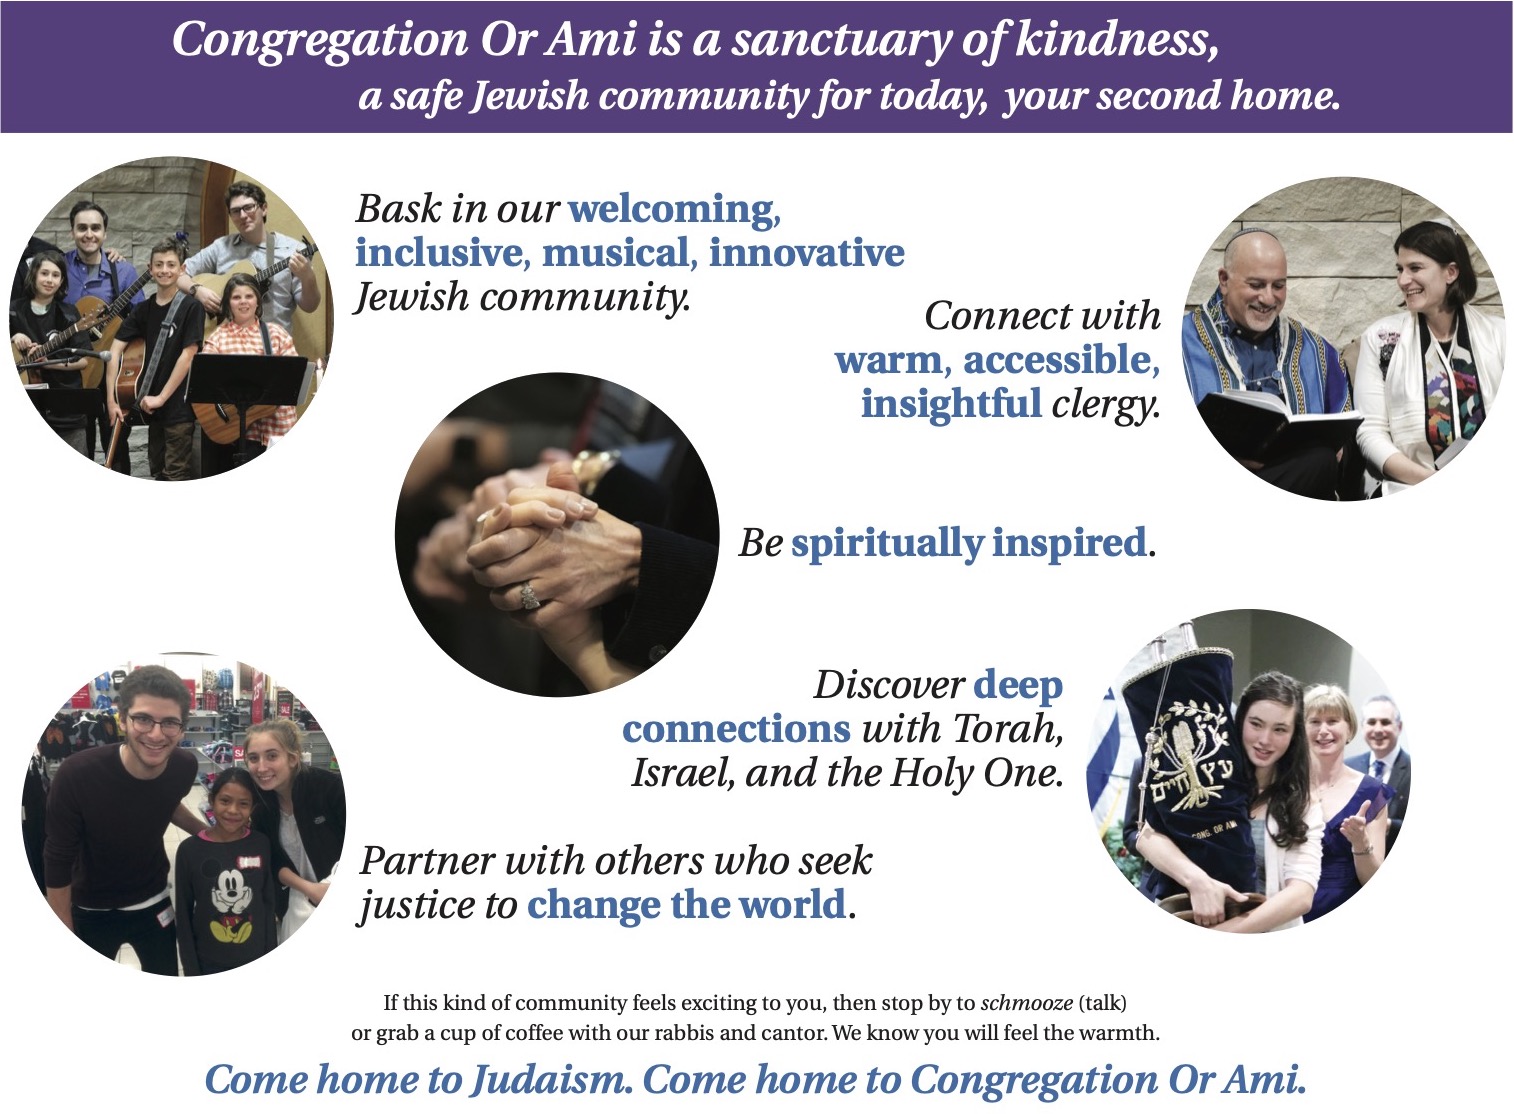 or ami vision statement page_cropped